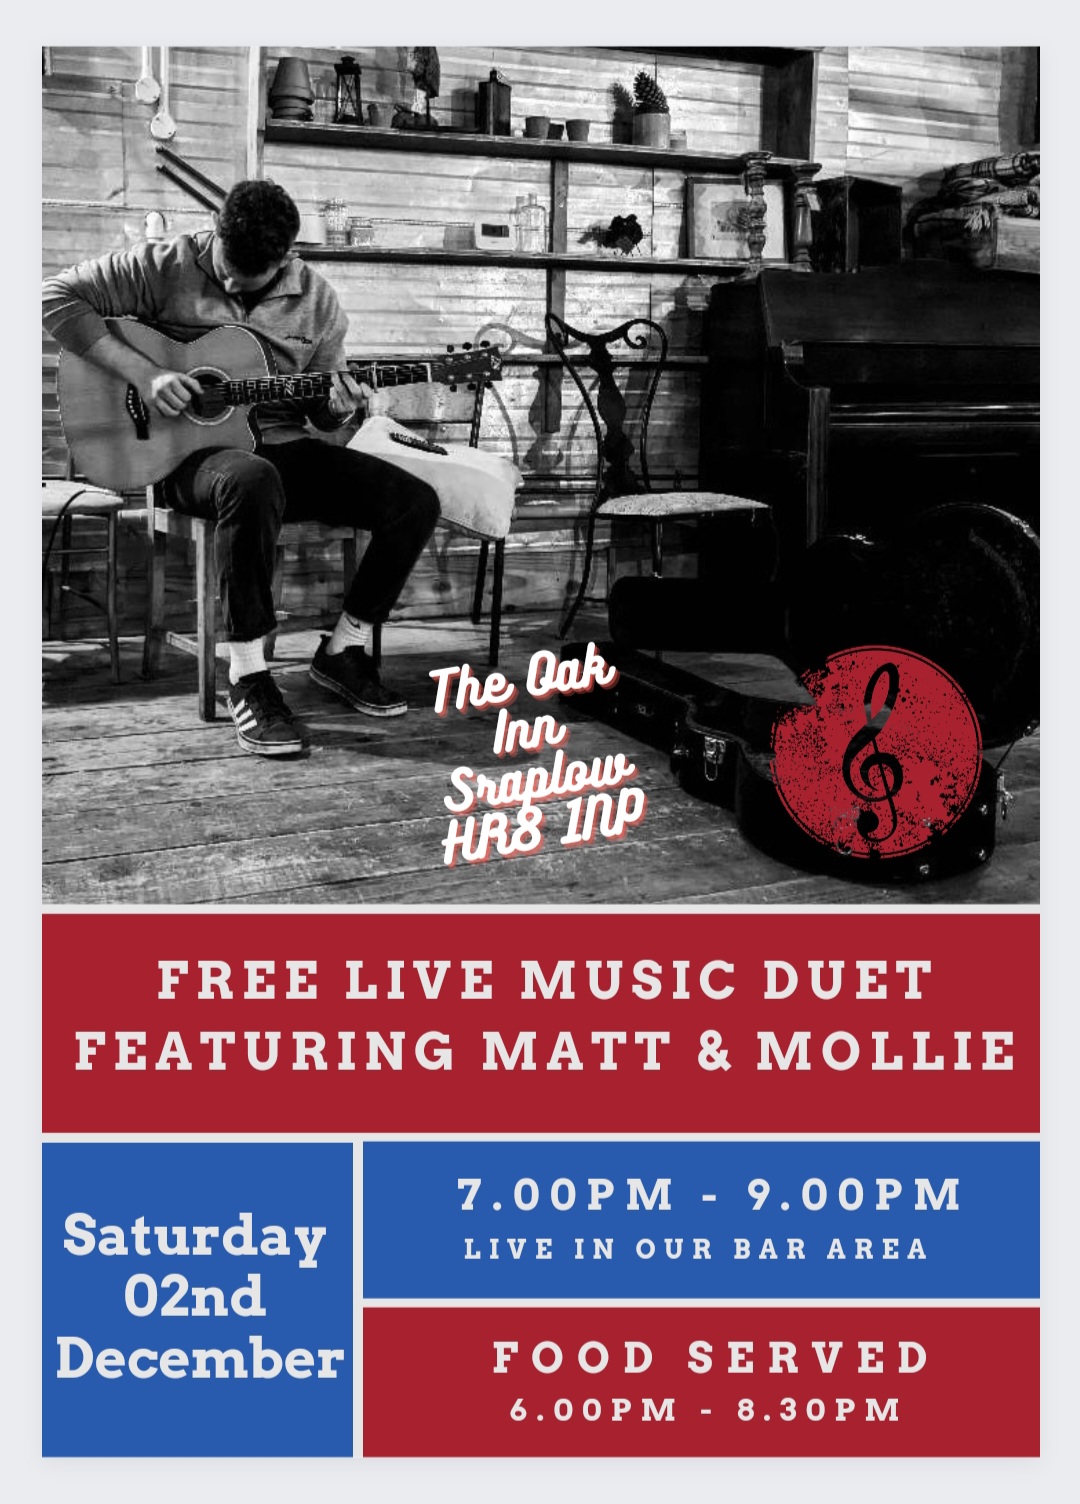 FREE LIVE MUSIC - Local quitarist MATT CASTREE & female vocalist MOLLIE perform on SATURDAY 02nd December from 7pm until 9pm